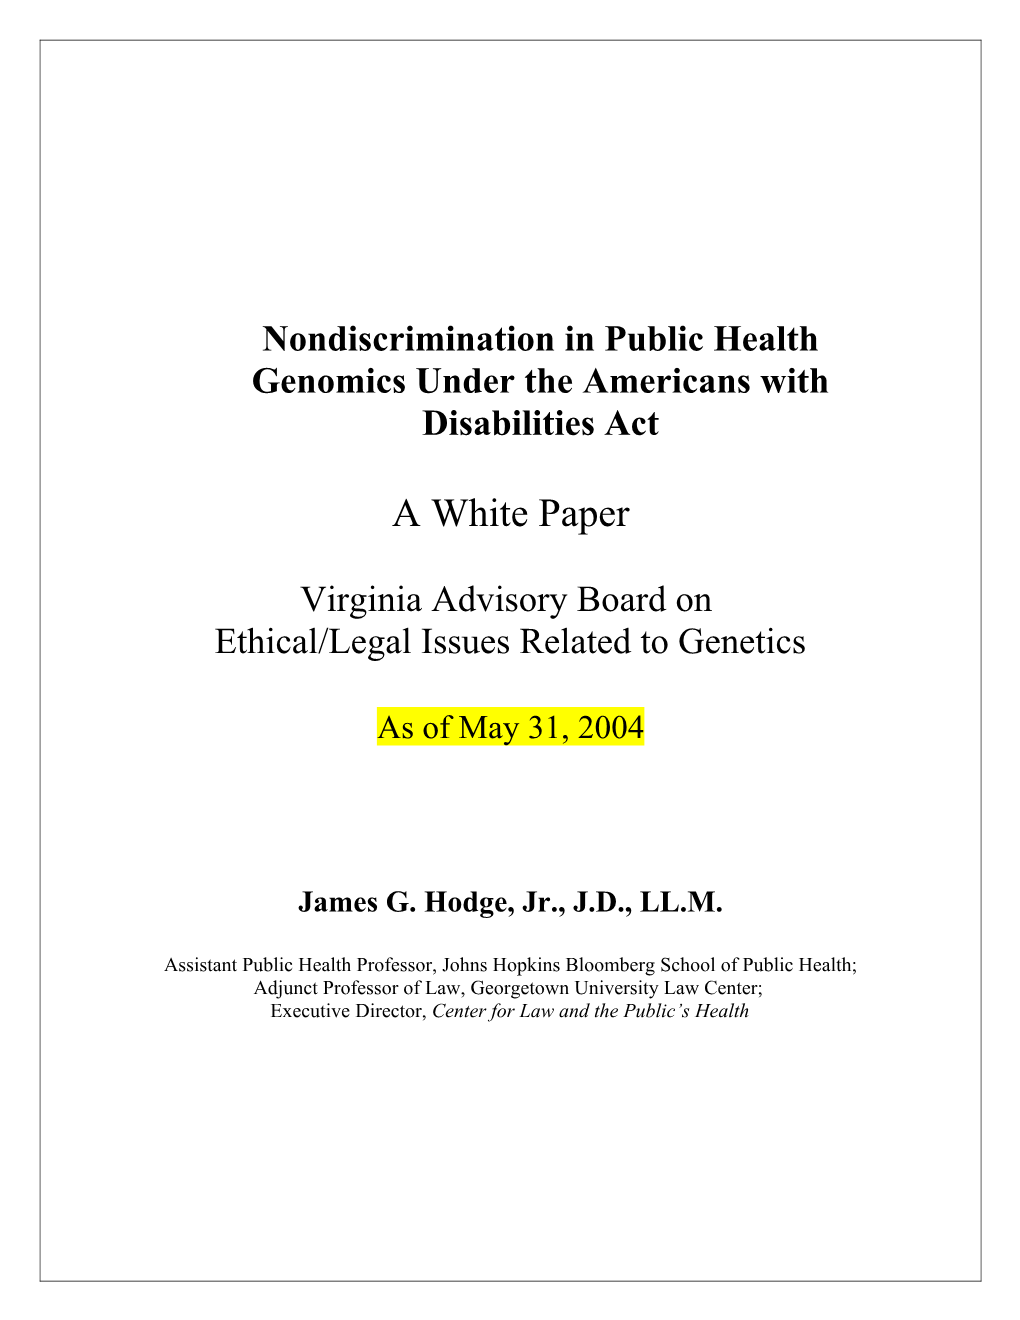 Nondiscrimination in Public Health Genomics Under the Americans with Disabilities Act